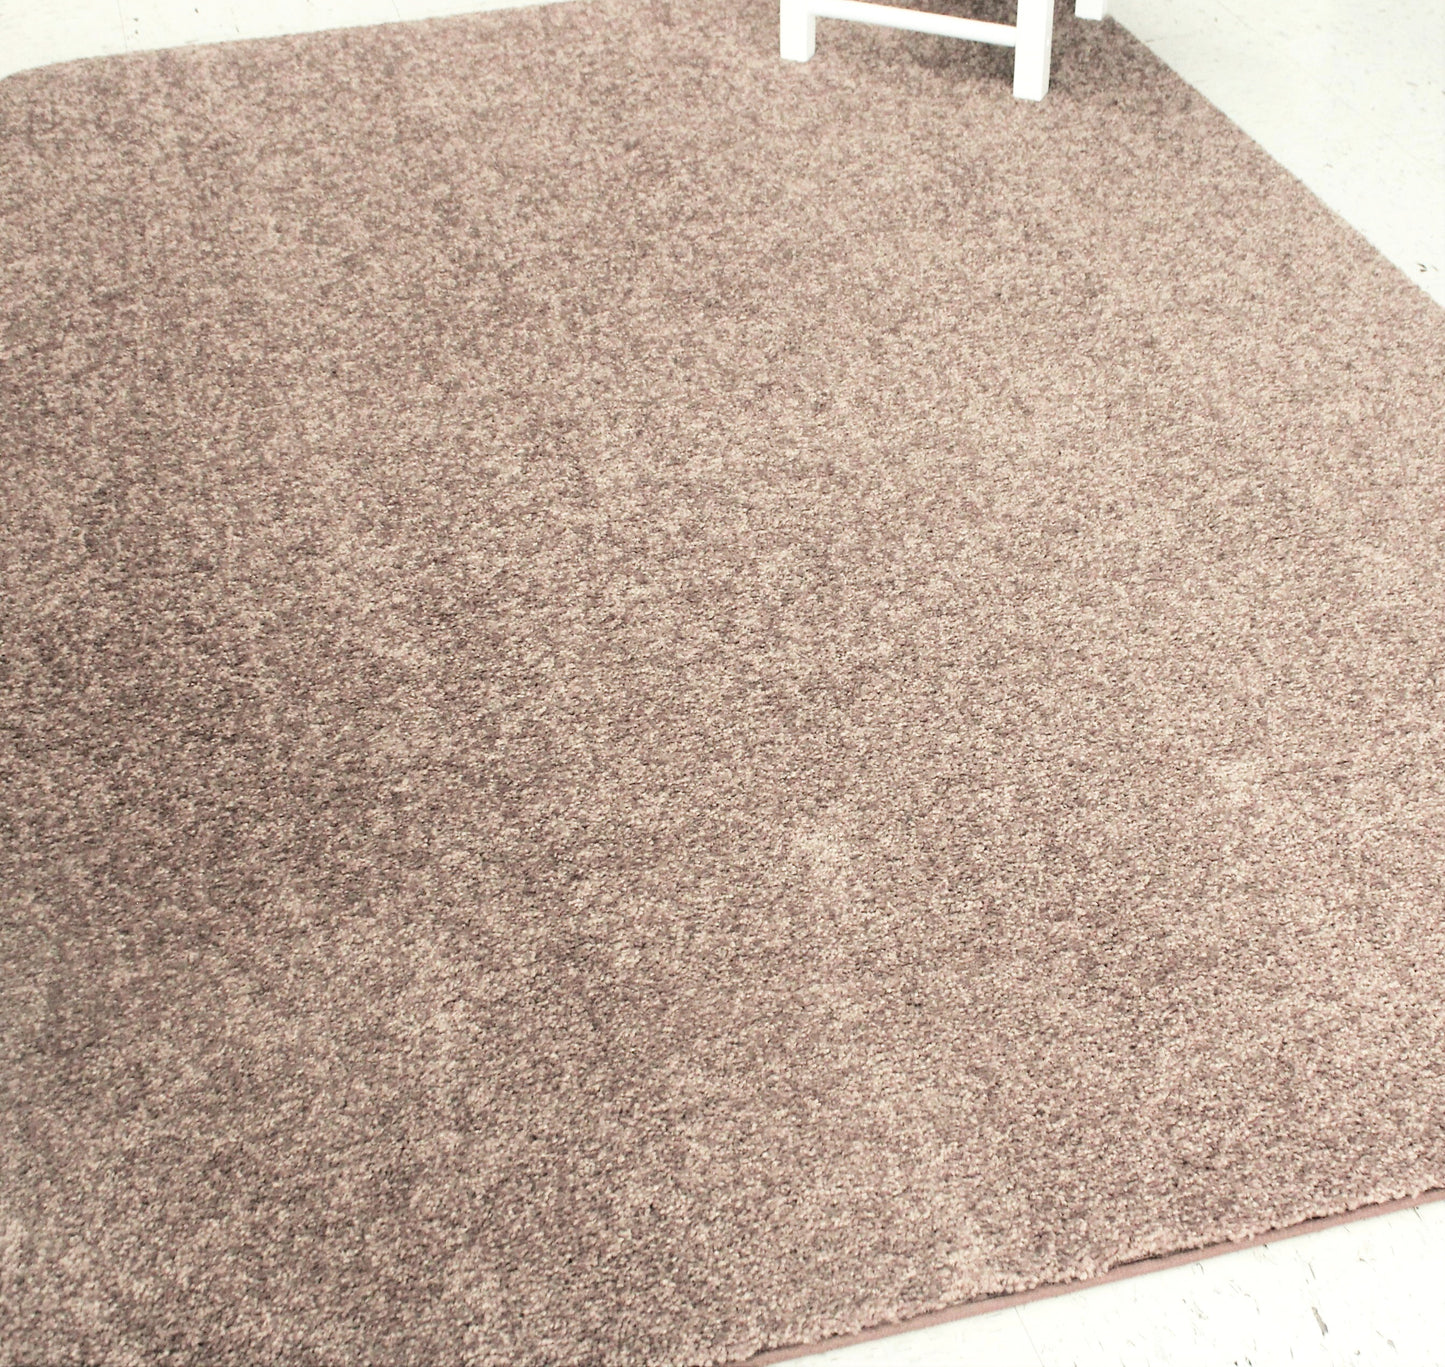 Winter Brown Area Rug on tile floor with chair